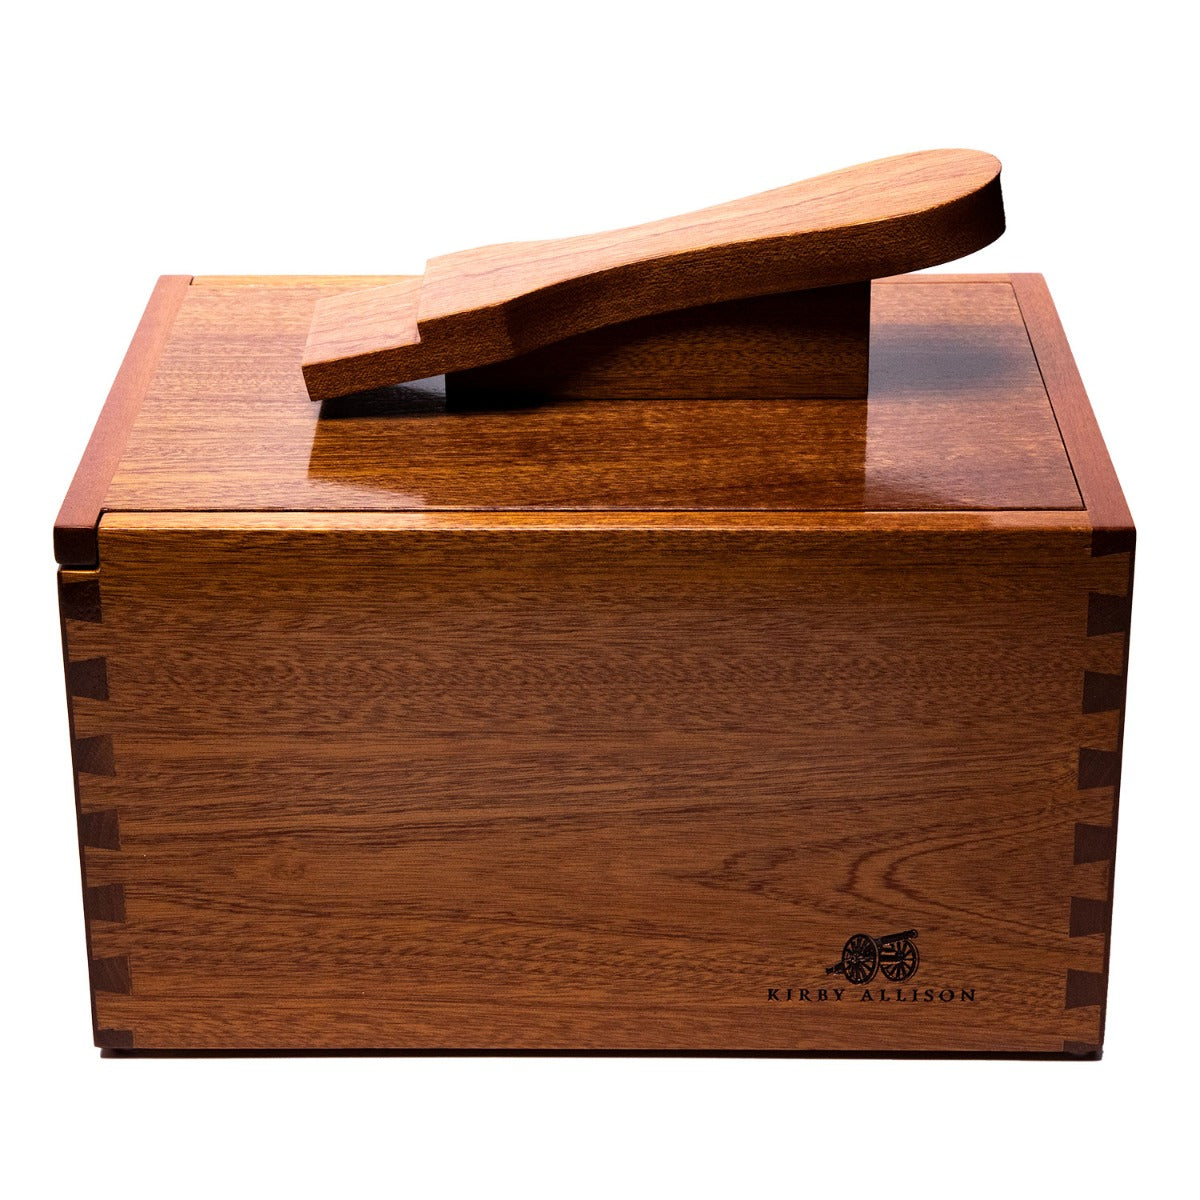 A handcrafted Deluxe Walnut Shoeshine Valet with a wooden handle on top by KirbyAllison.com.